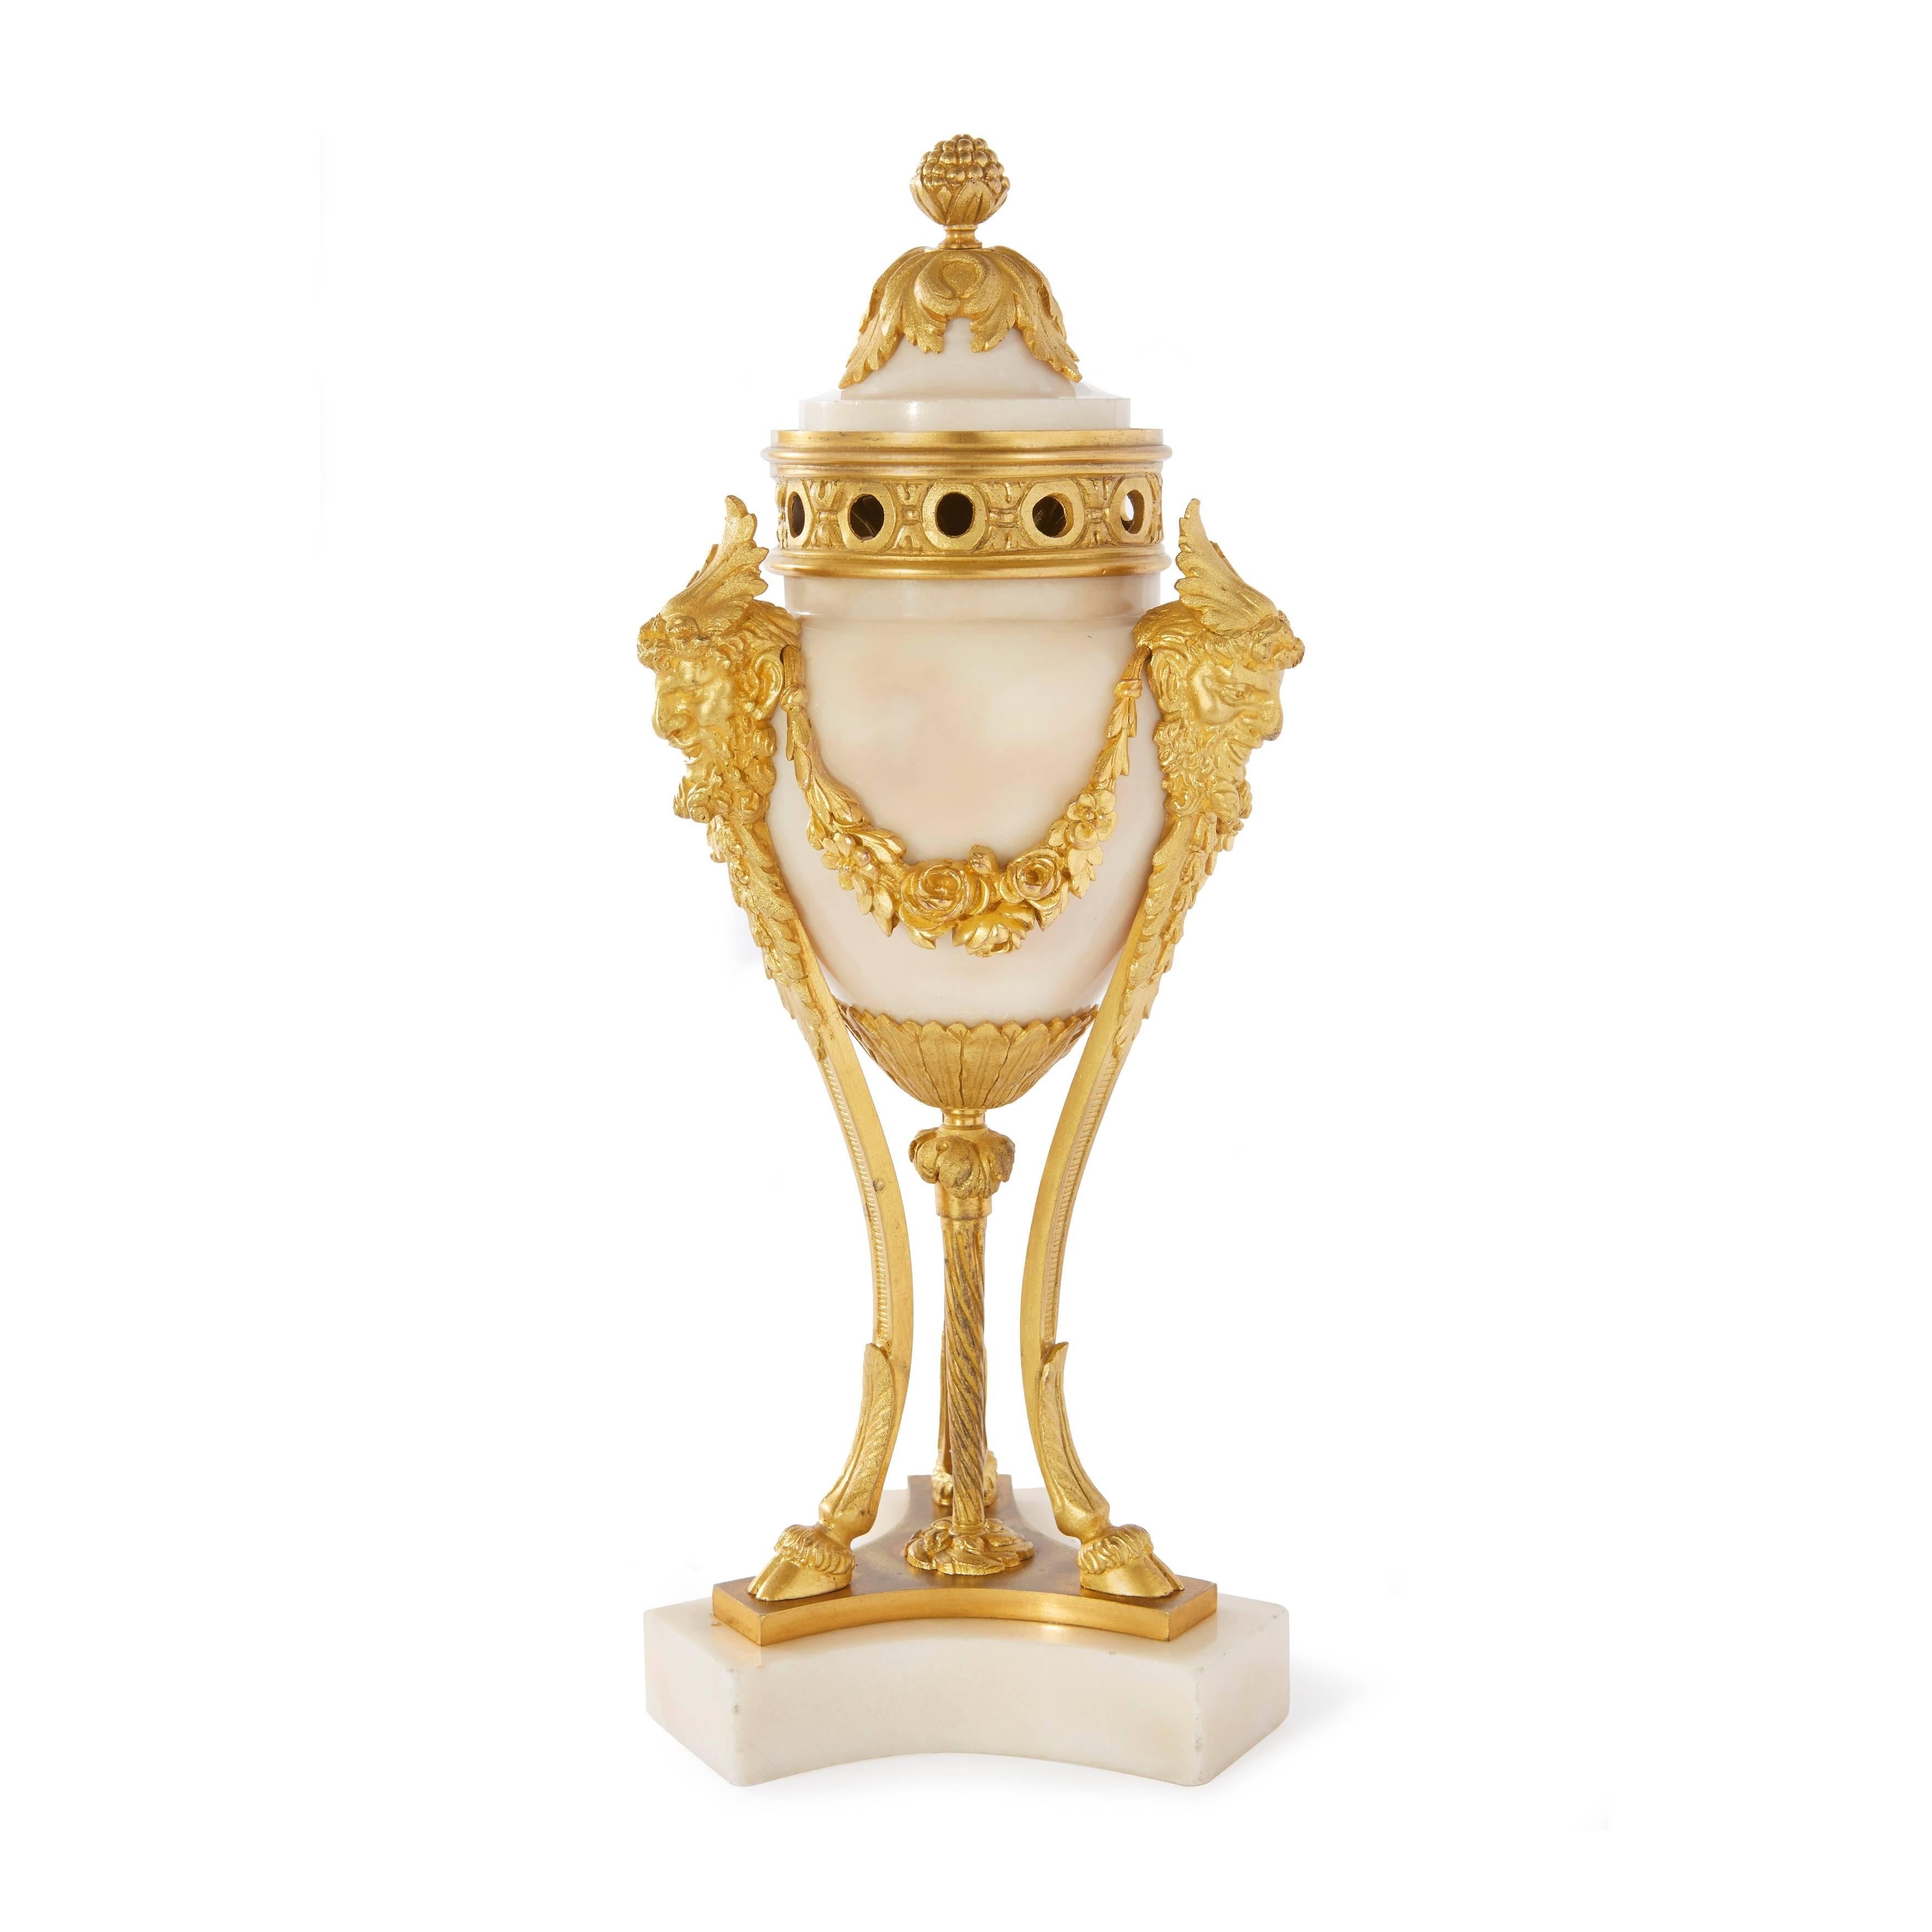 Each converting to three-light candelabra with pierced collars and foliate sconces on ovoid bodies and cabriole supports. 

These unusual cassolettes can be transformed into a pair of fine candelabra, making them an intriguing addition to any